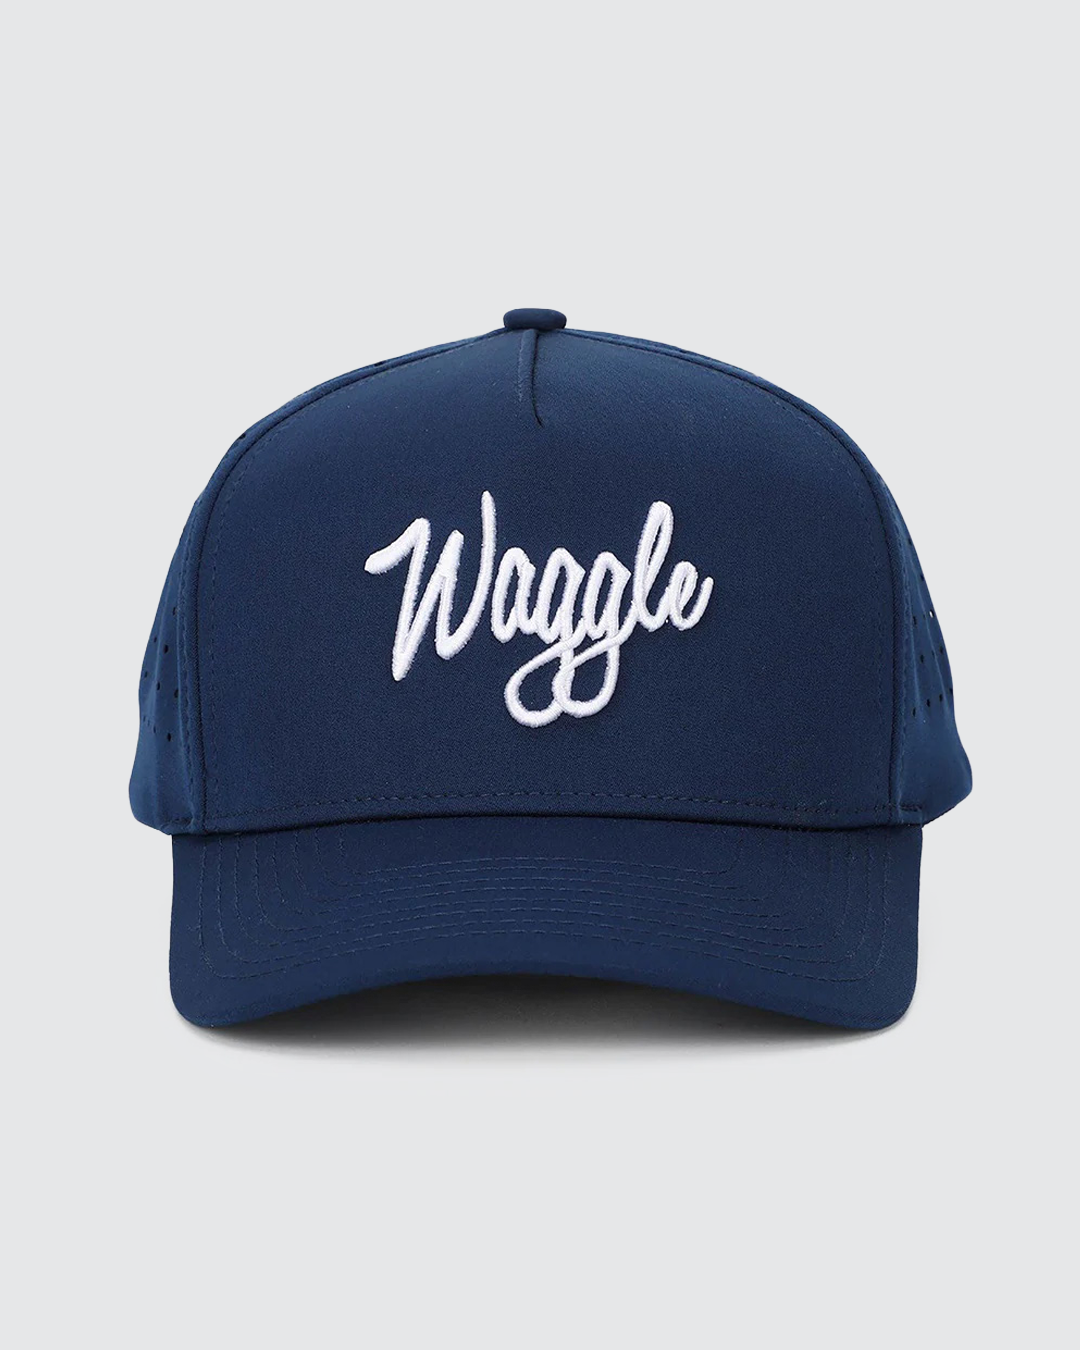 Waggle Men's Decoy Hat  Free Shipping at Academy